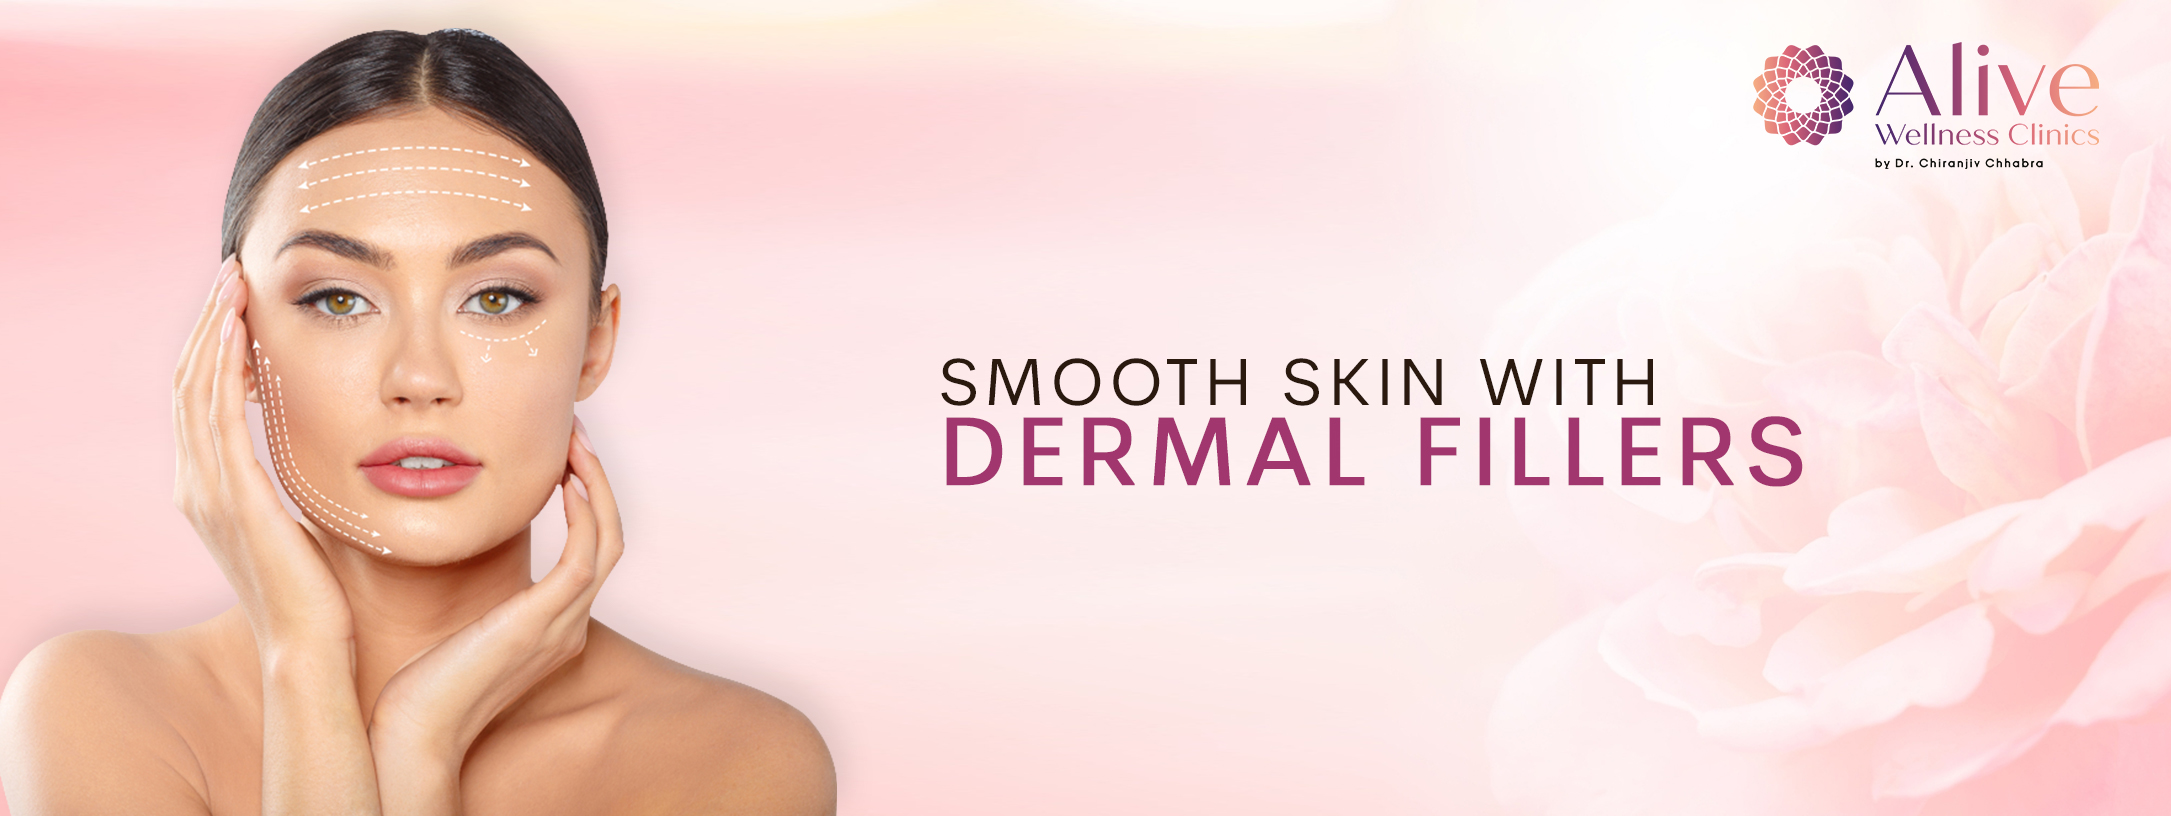 Read more about the article Smooth Skin with Dermal Fillers: What You Need to Know